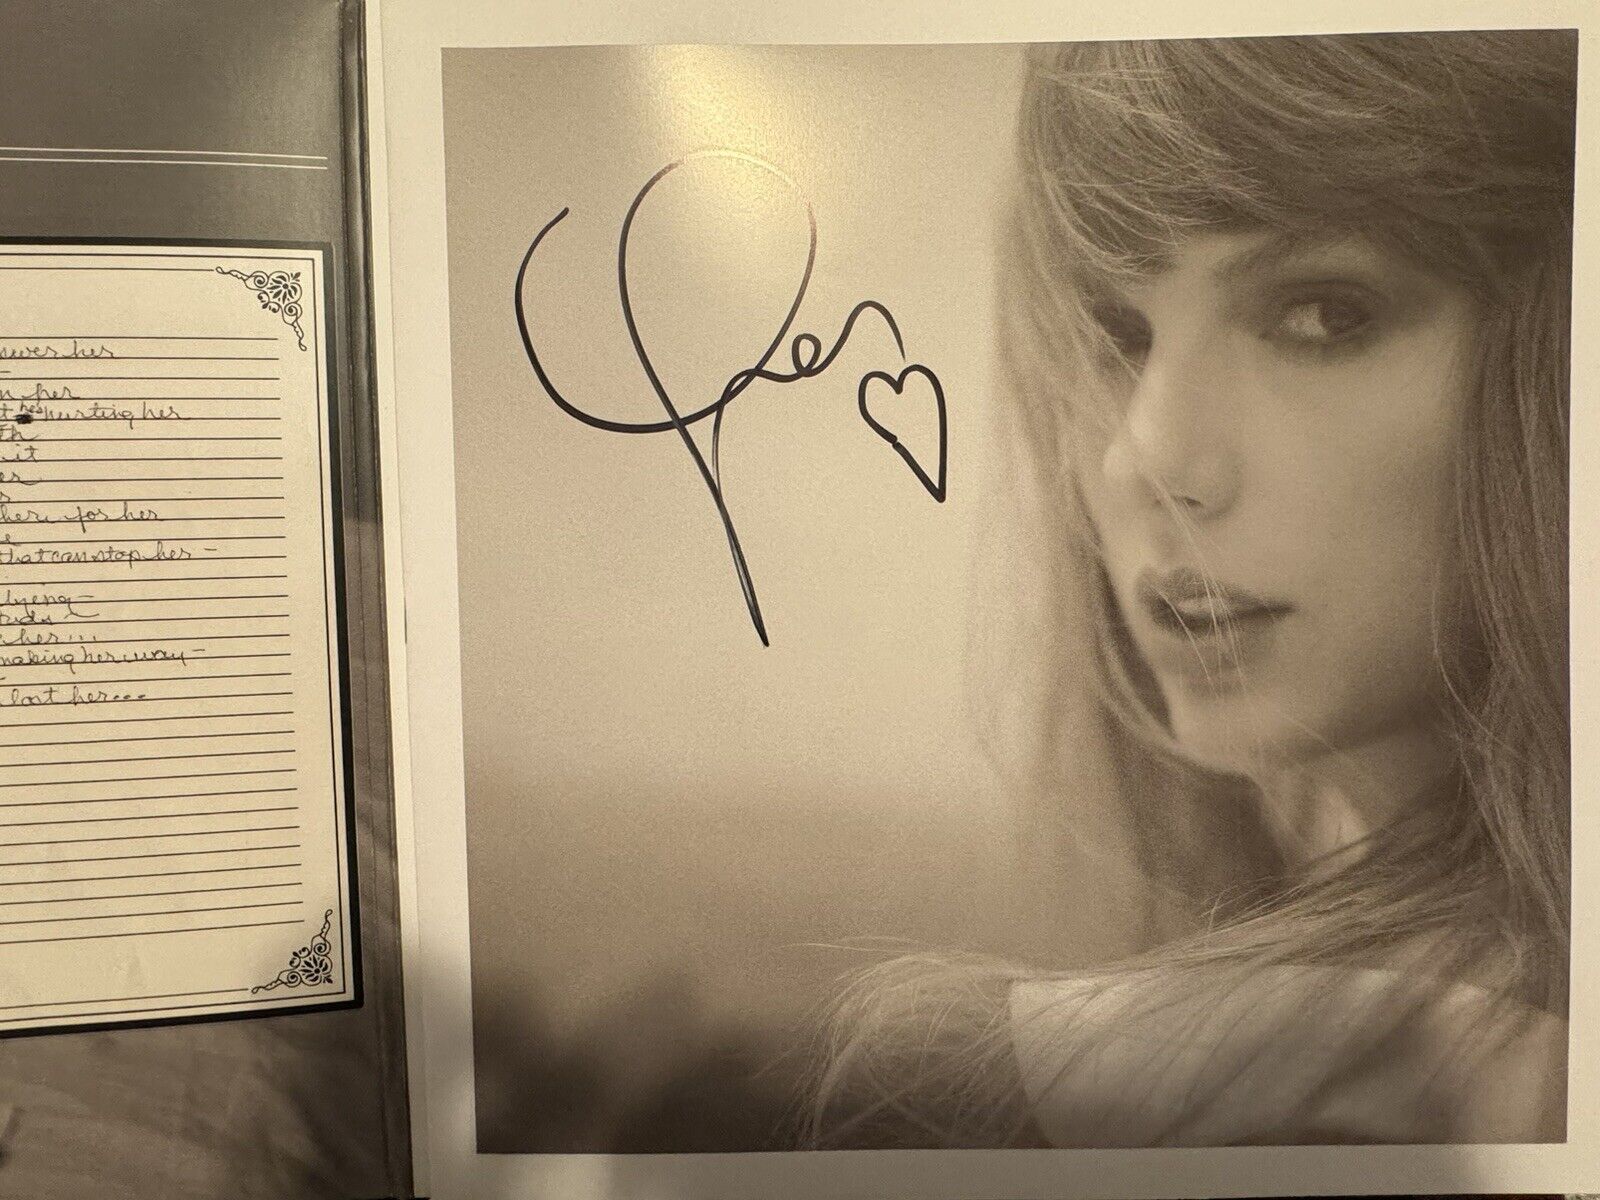 Taylor Swift The Tortured Poets Department Vinyl. Hand Signed Photo w/ Heart ❤️